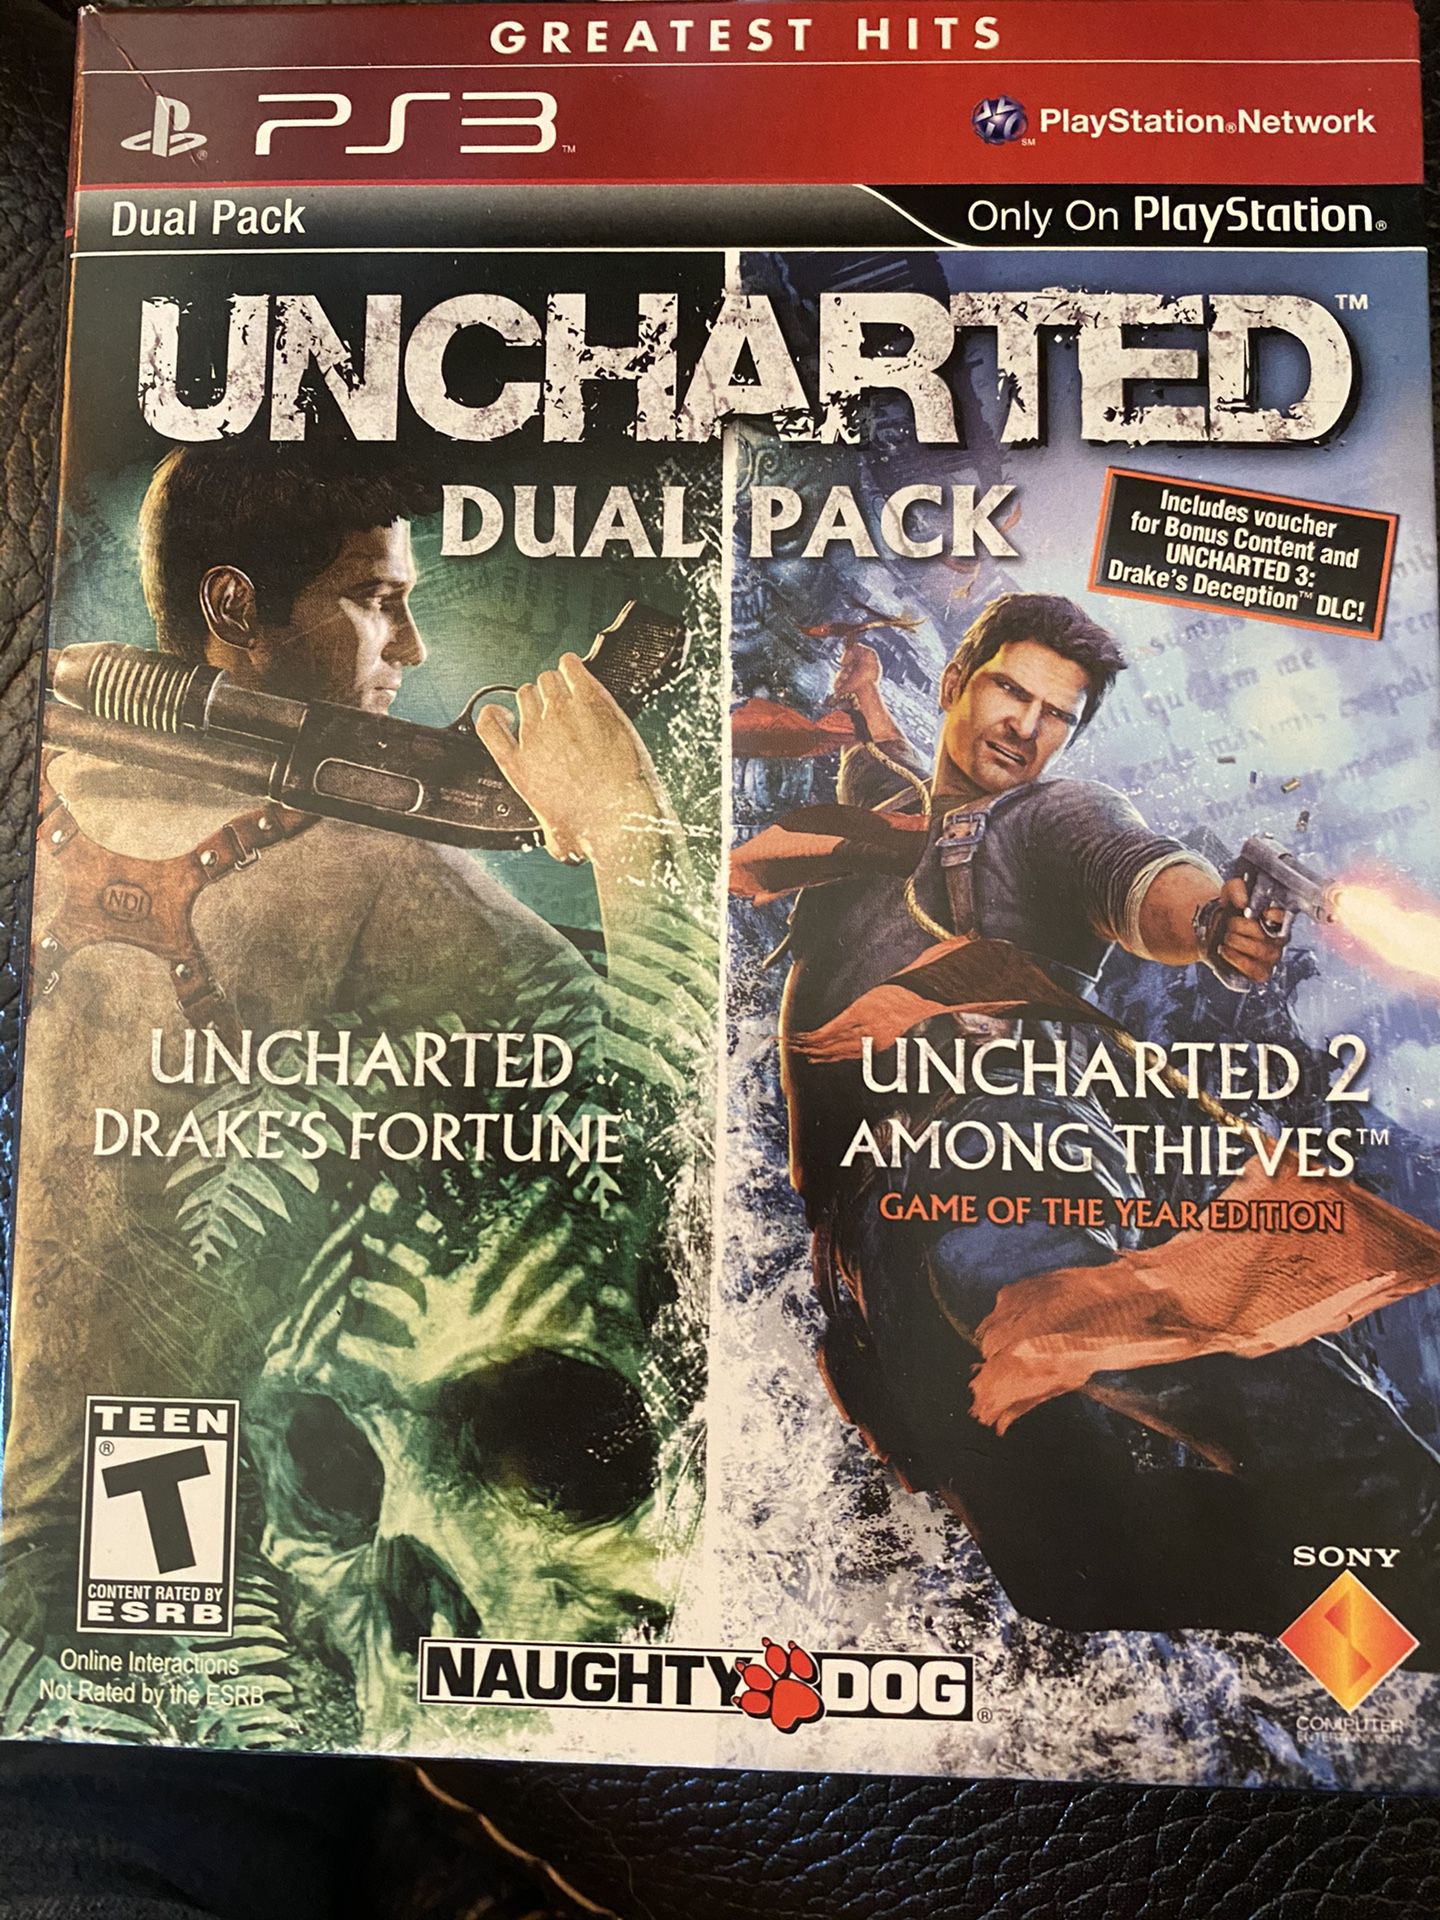 PS3 - Uncharted Dual Pack